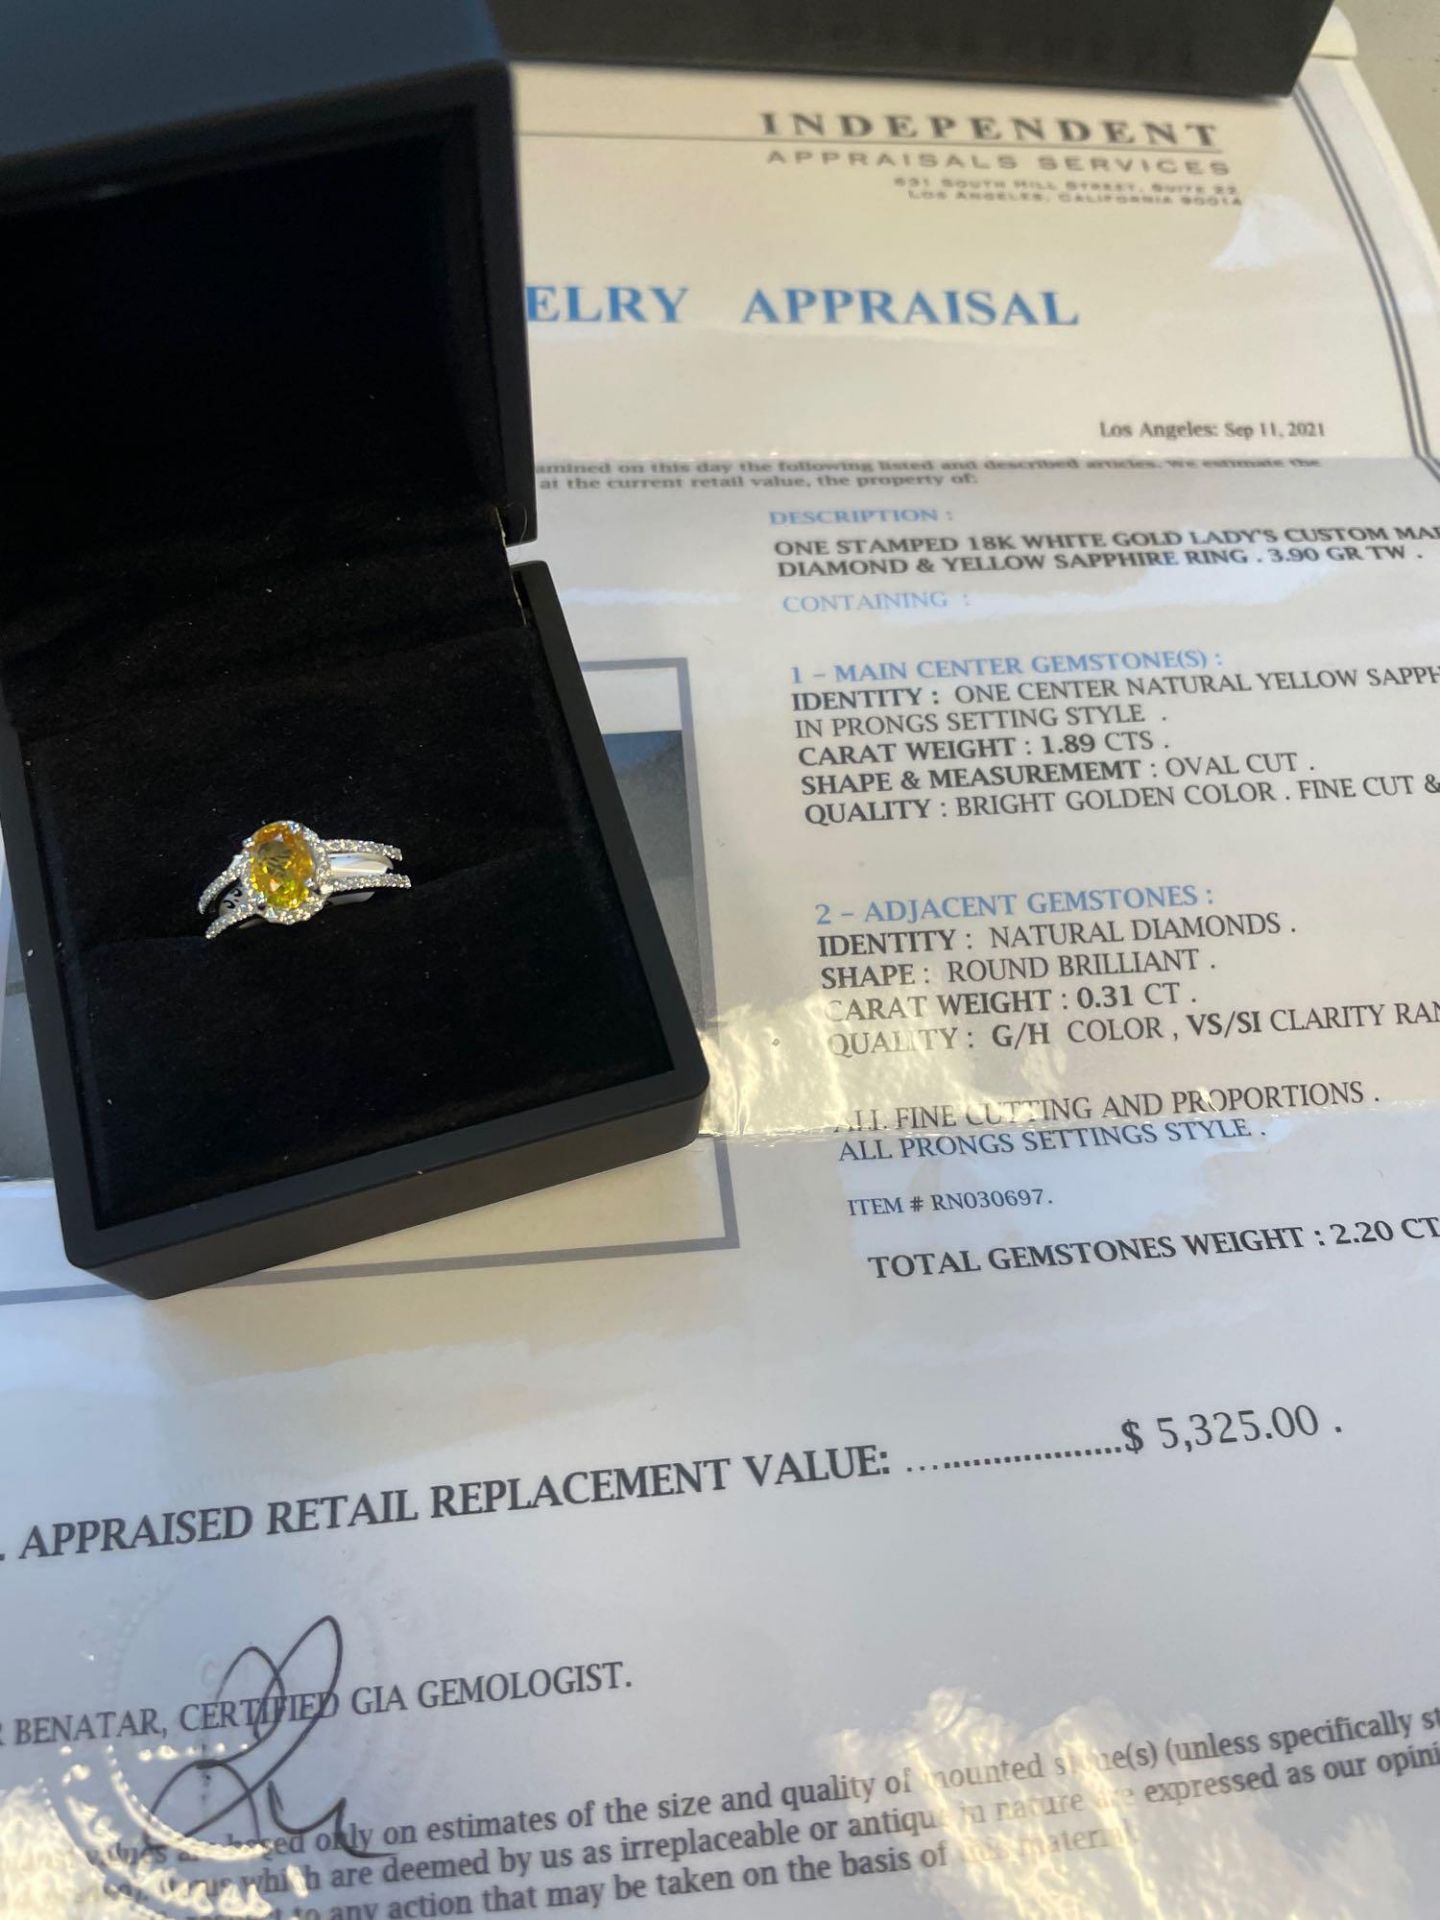 18k White Gold lady's custom made diamond and yellow sapphire ring 3.90 gr Tw - Image 5 of 5